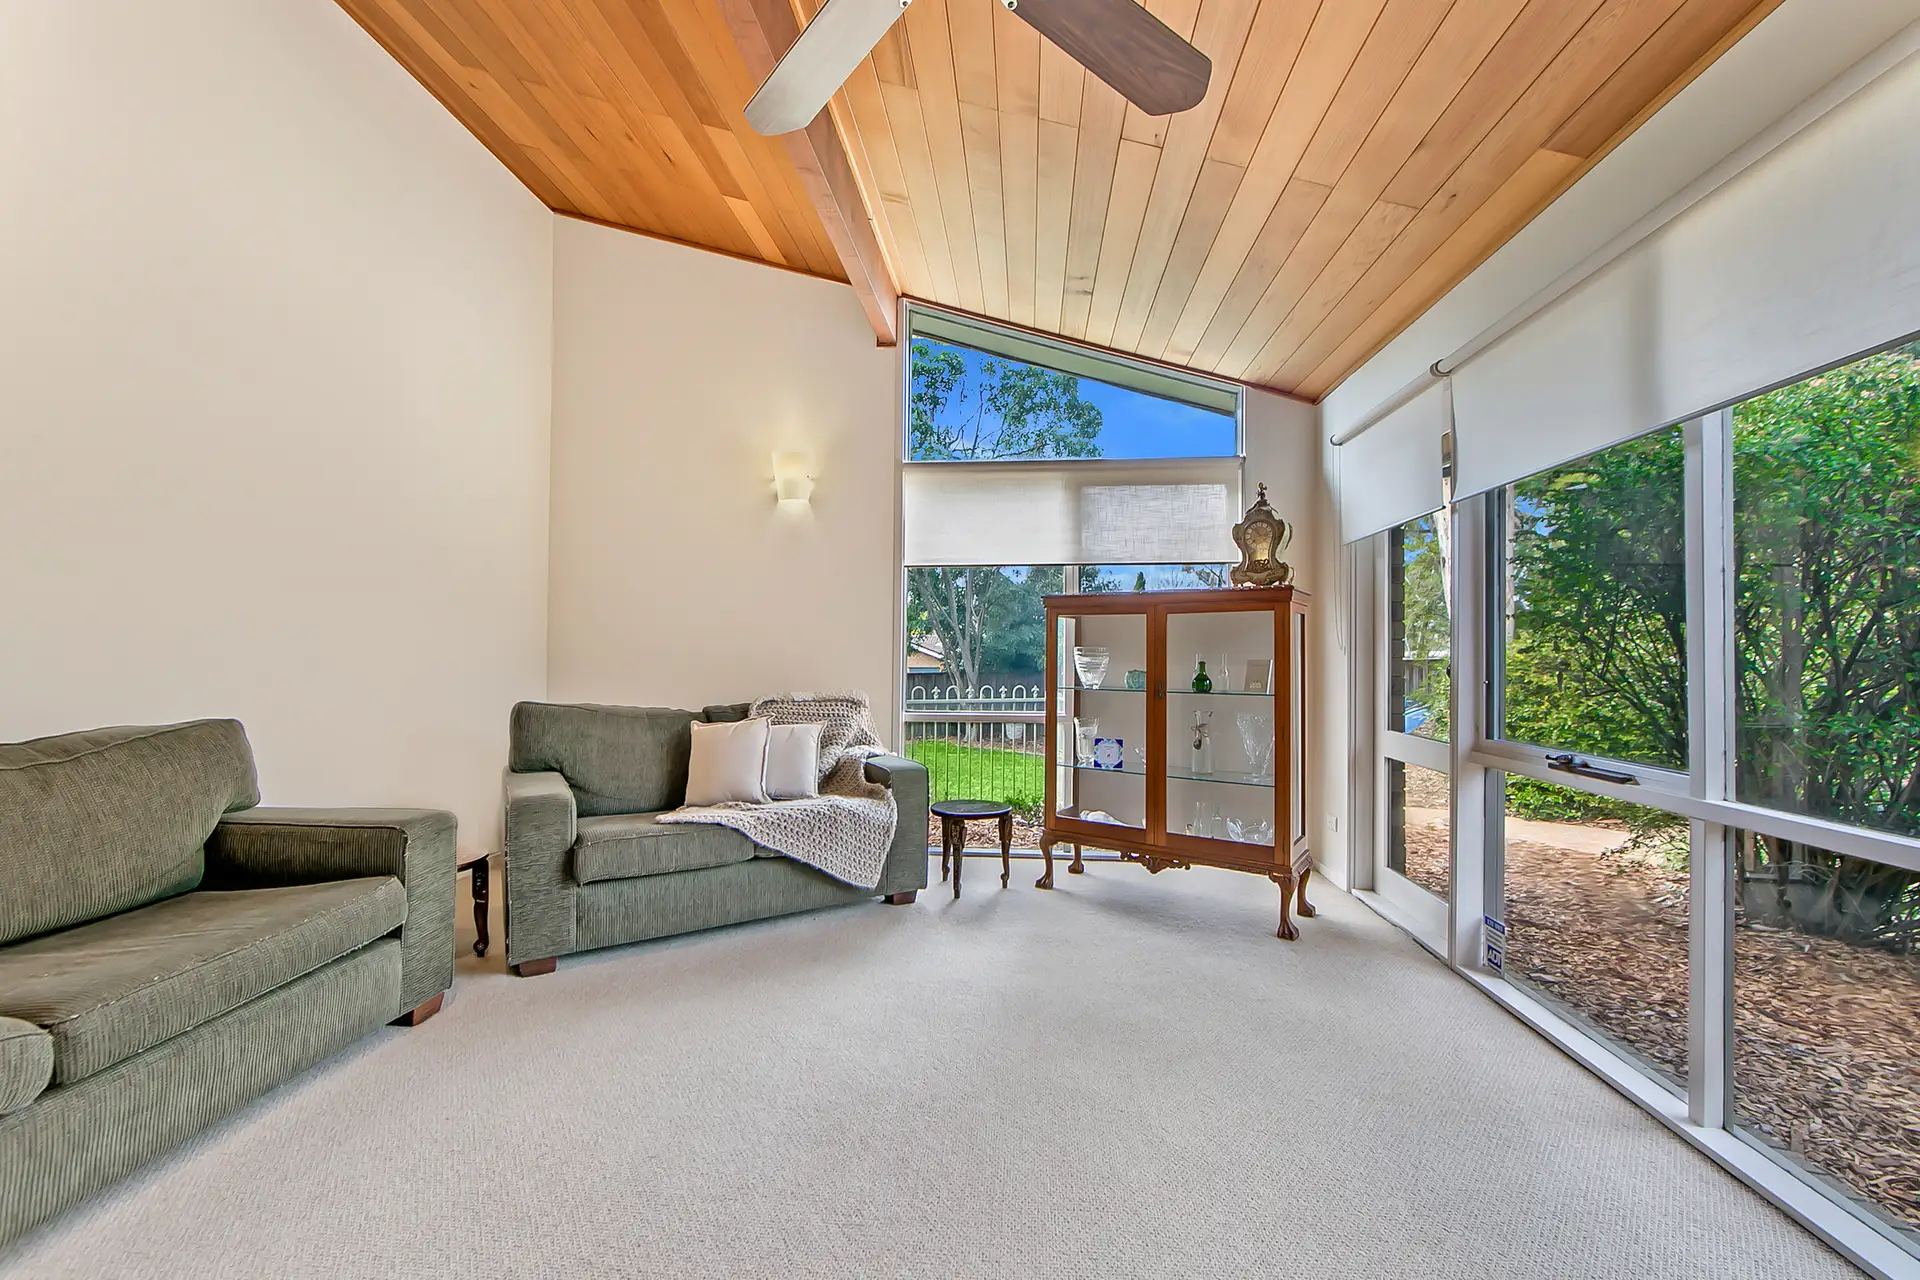 Photo #4: 4 Camellia Court, Cherrybrook - Sold by Louis Carr Real Estate